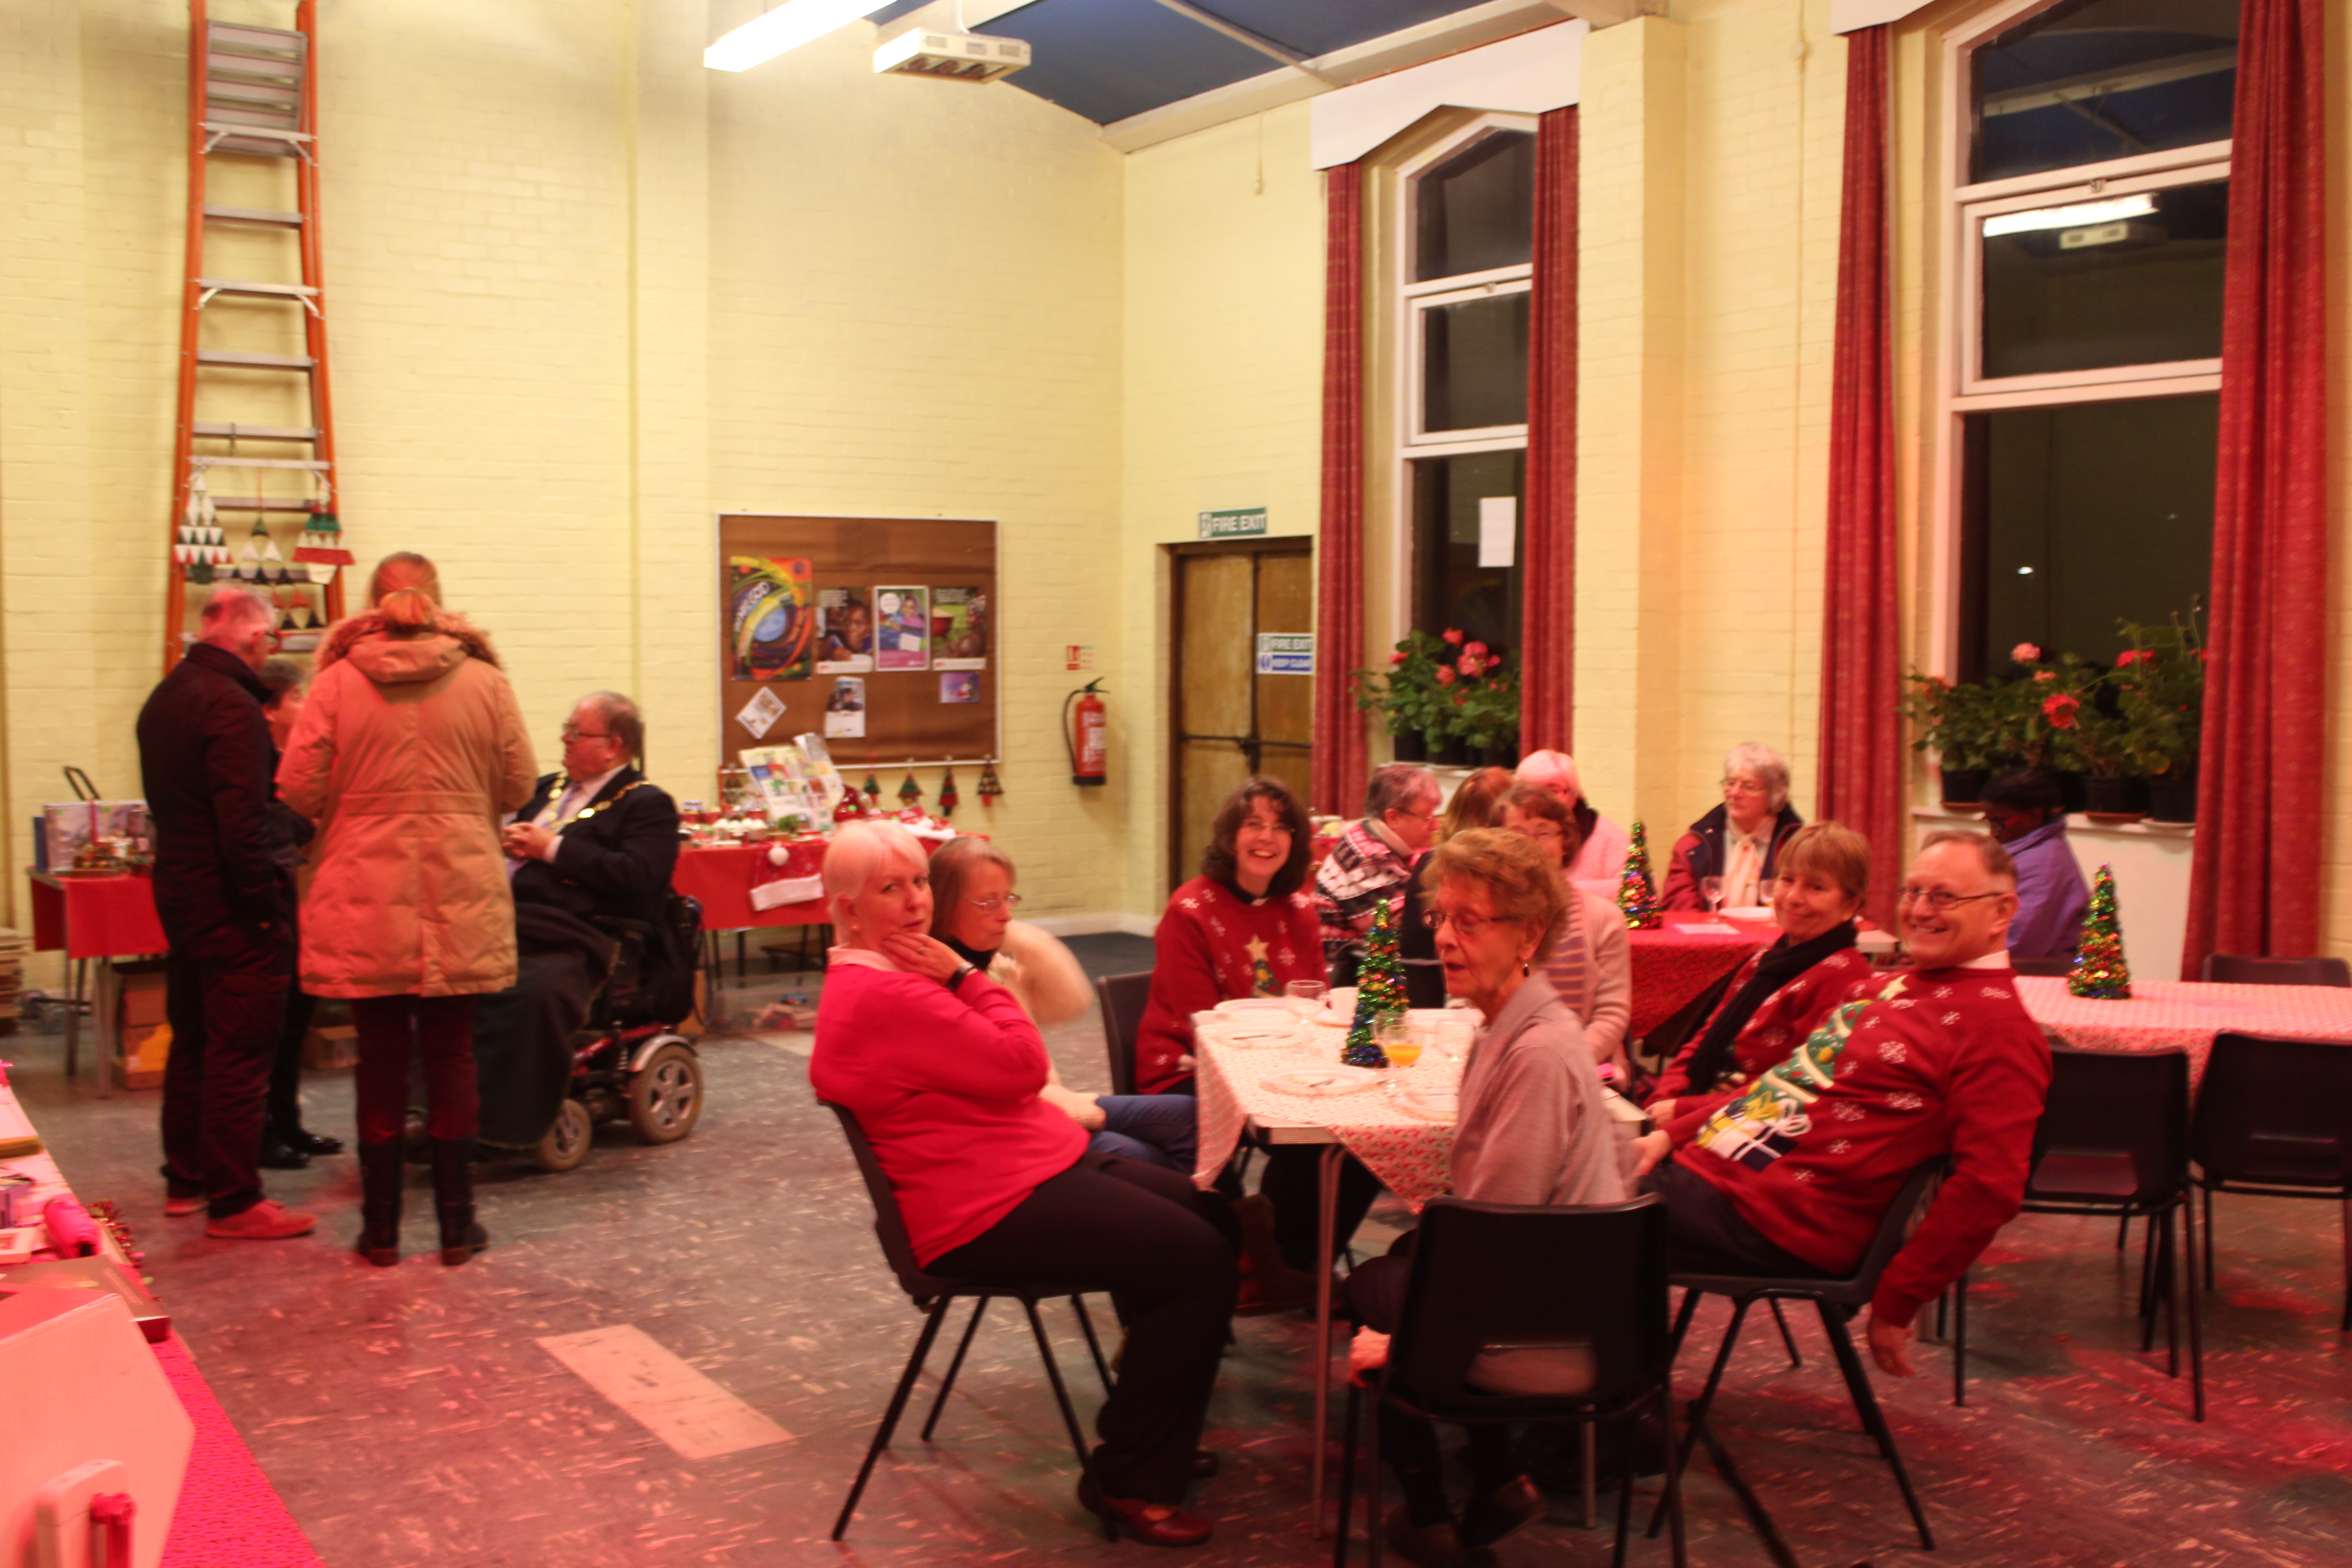 Refreshments in the church hall